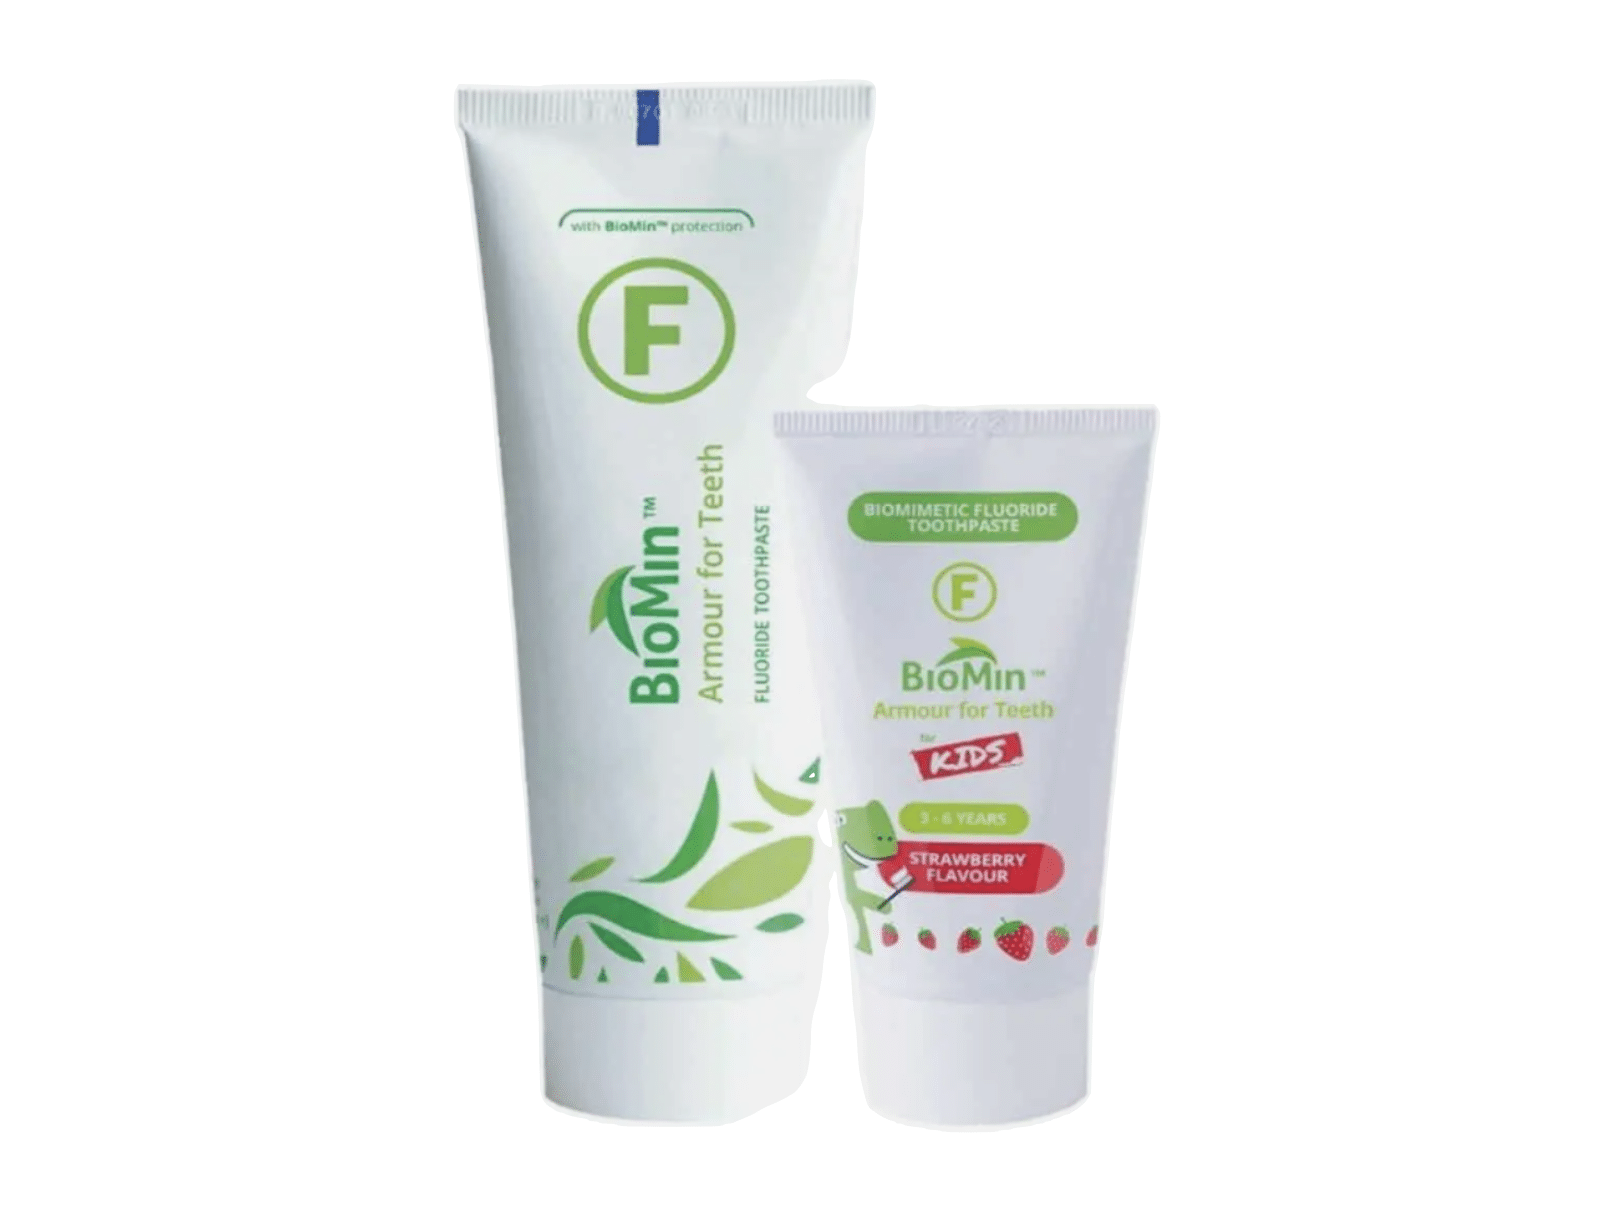 Biomin Toothpaste (£ 9.00)